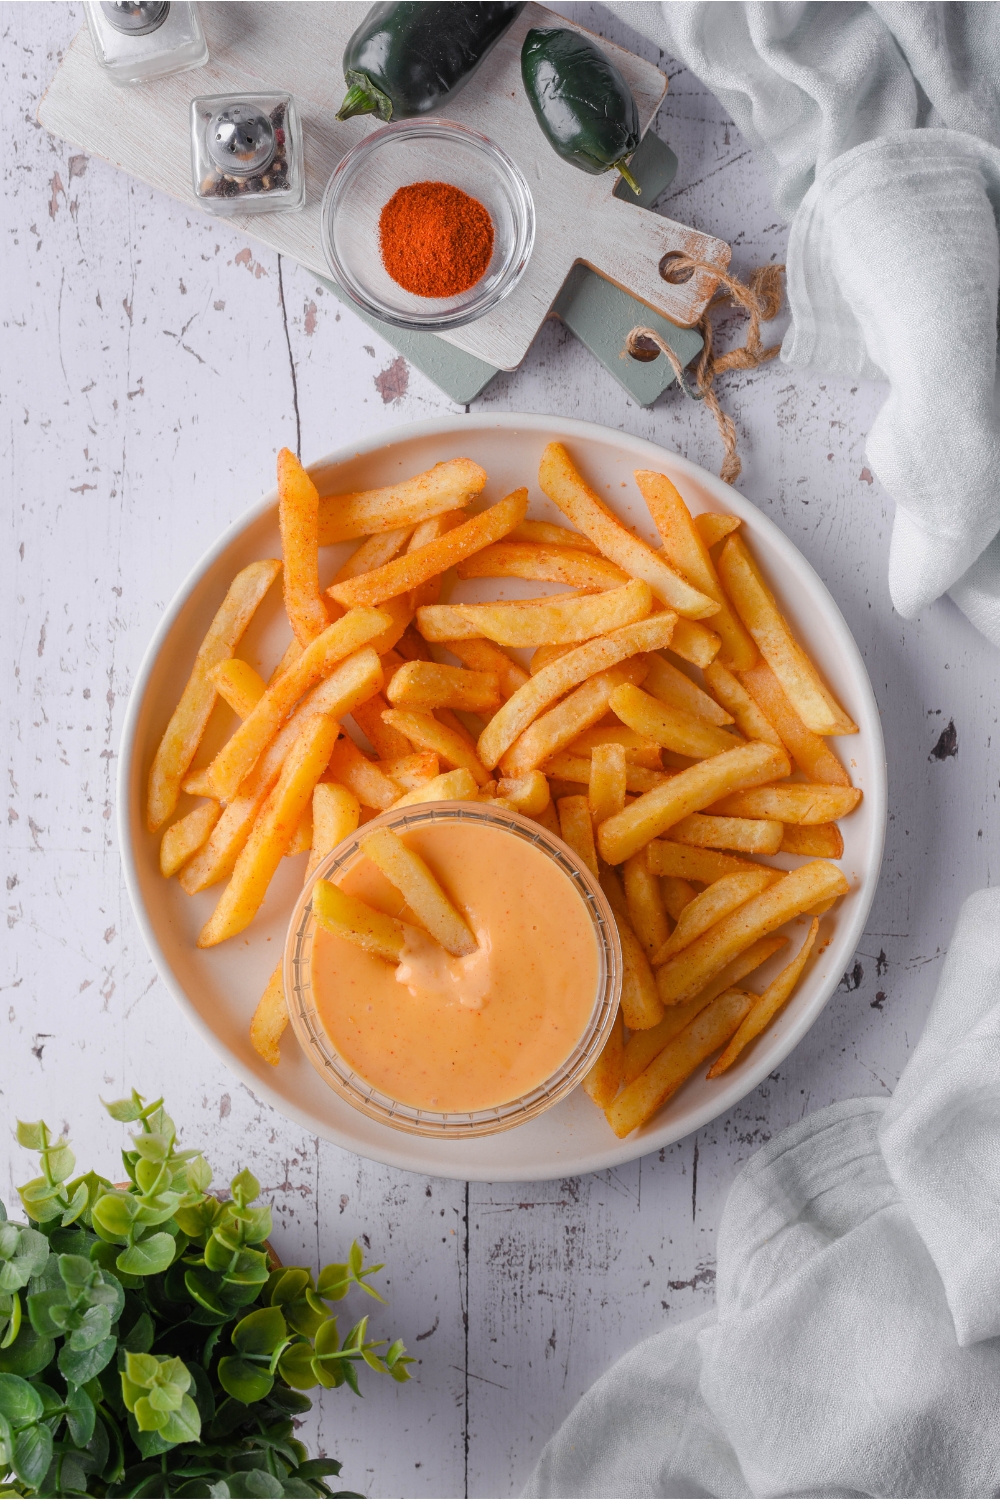 Overhead view of a plate of french fries with two fries stuck in the side dish of melted cheese sauce.